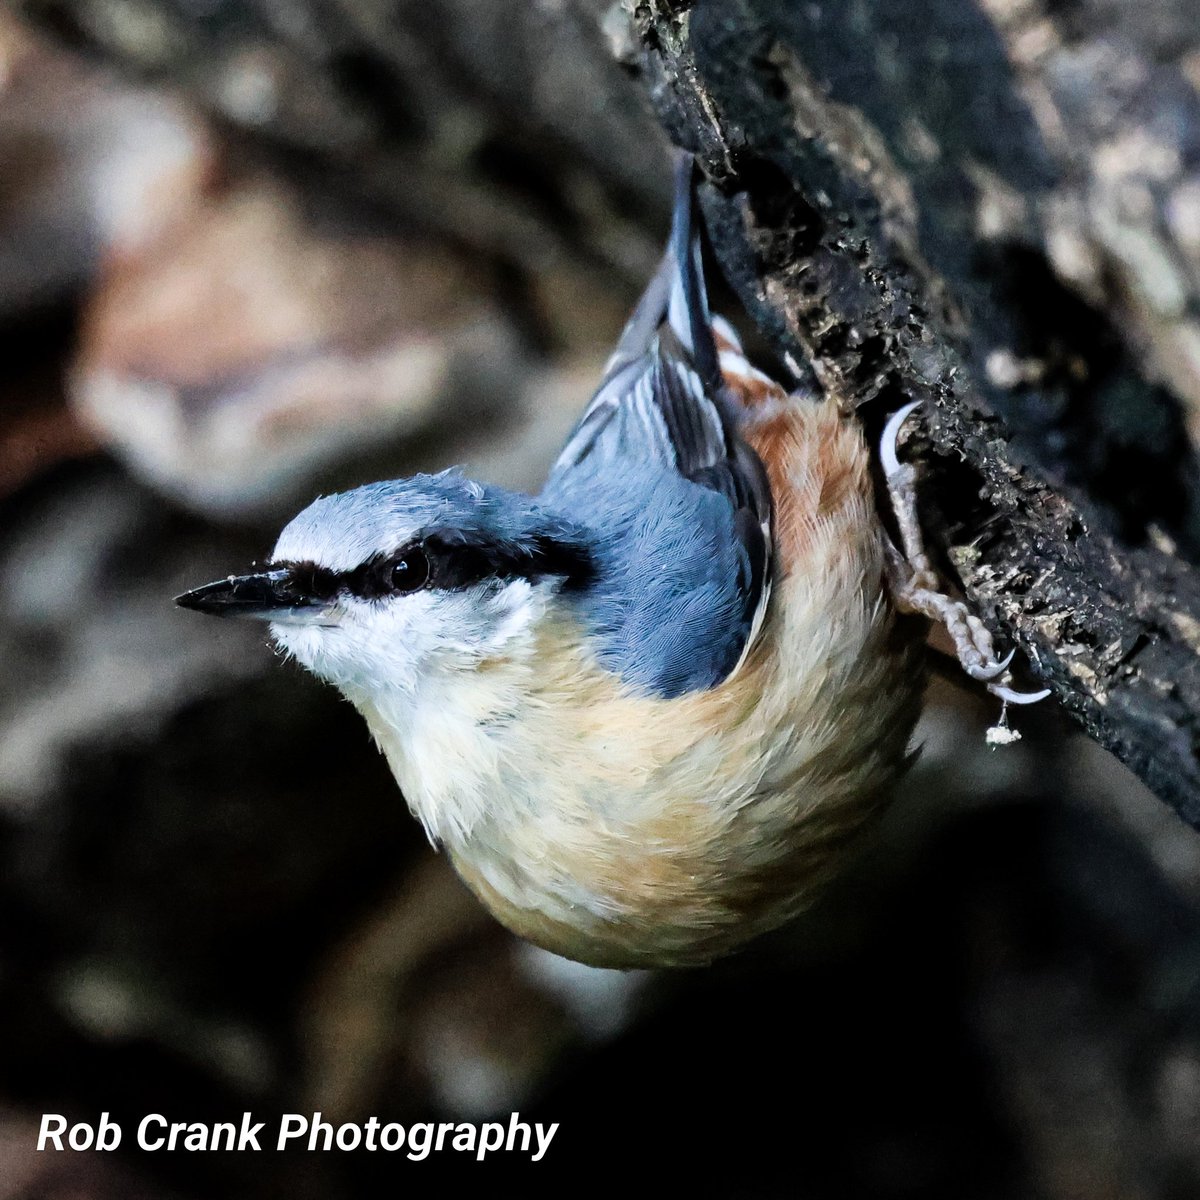 Nuthatches love showing off how flexible they are, and it's always a pleasure to see them when out & about.
#canonphotography #birdphotography  #NaturePhotograhpy #TwitterNaturePhotography #naturelovers #birds